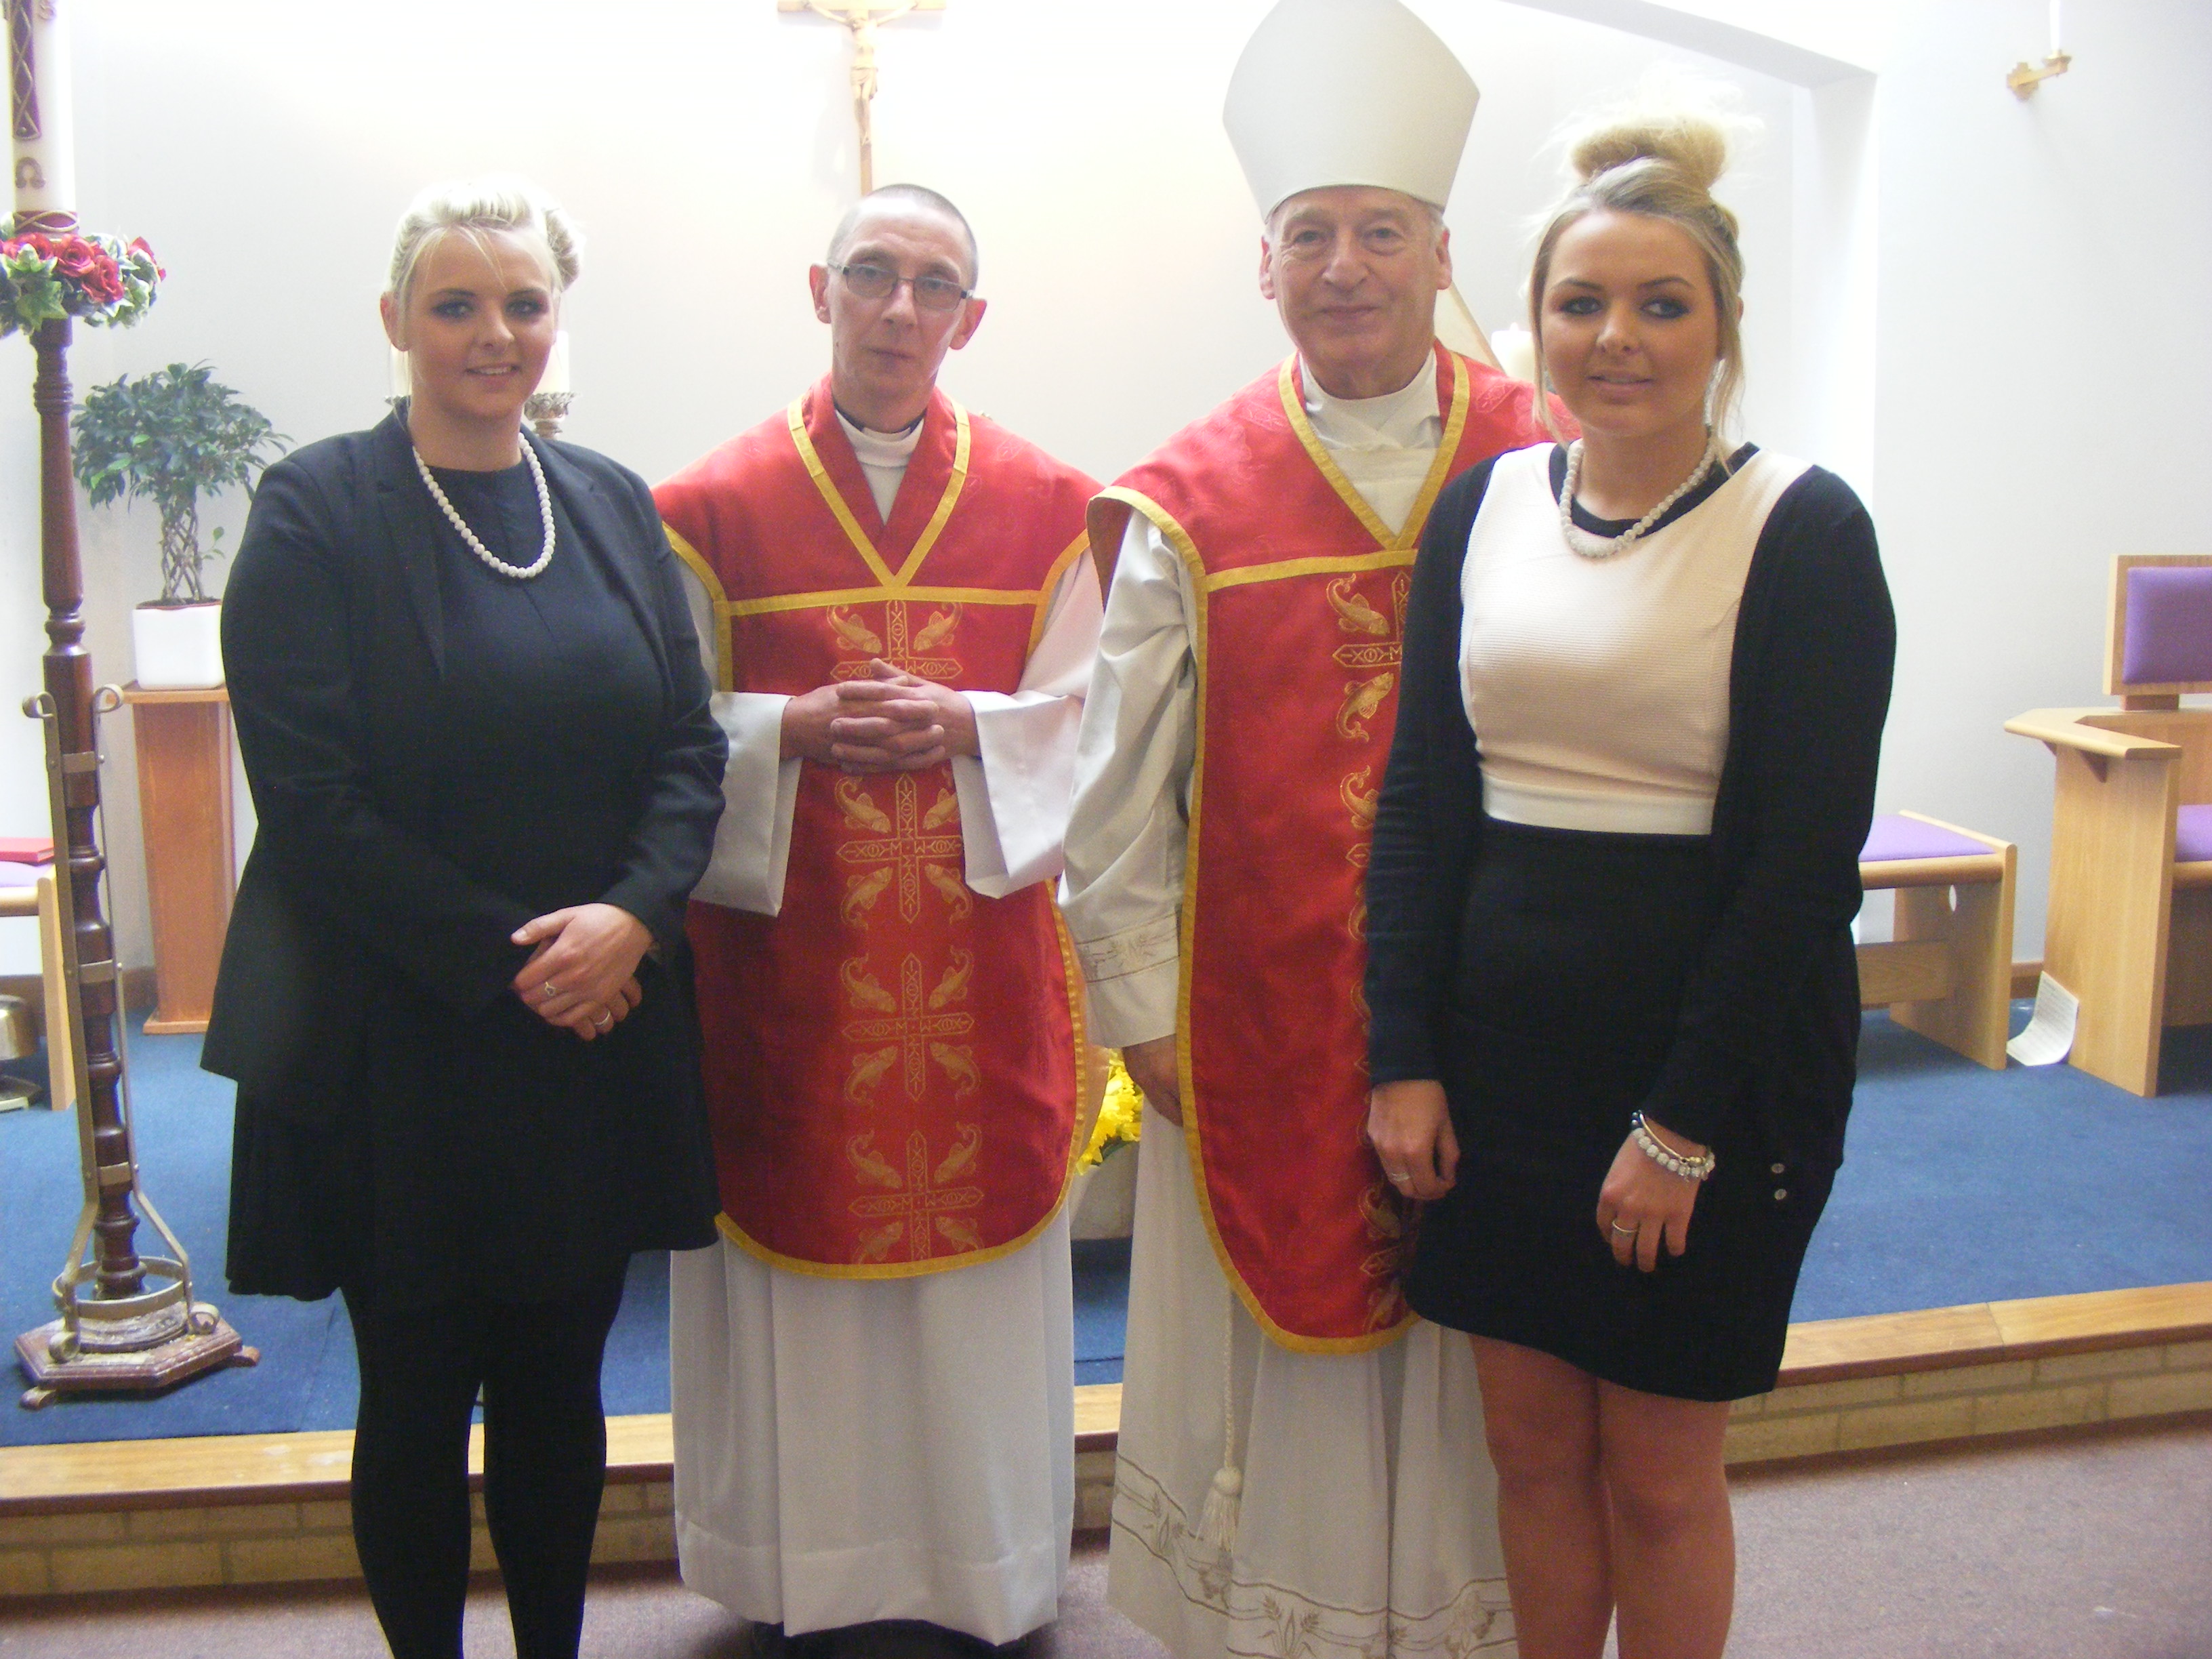 Kayleigh & Sophie with Monseigneur Broadhurst & Father Adam